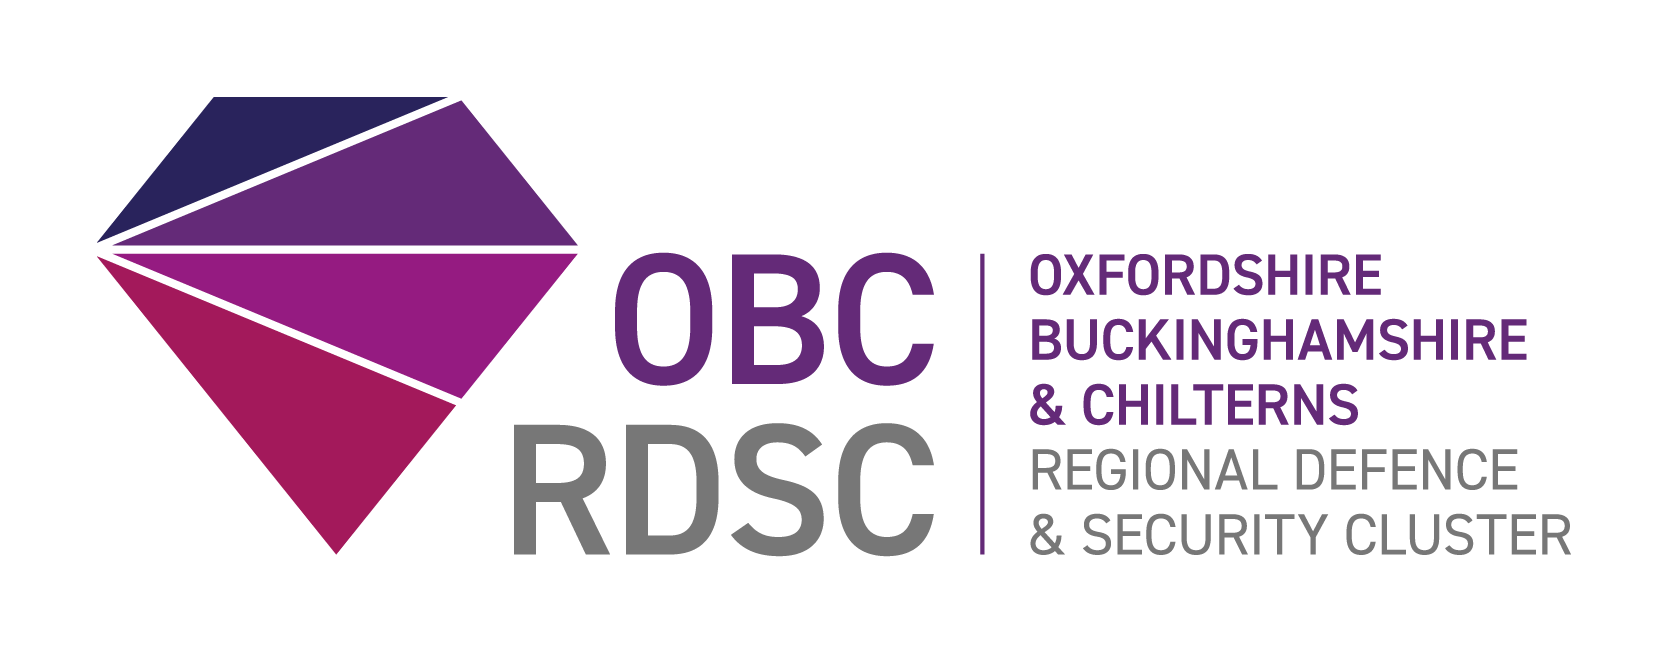 Oxfordshire, Buckinghamshire & Chilterns Regional Defence & Security Cluster Launch